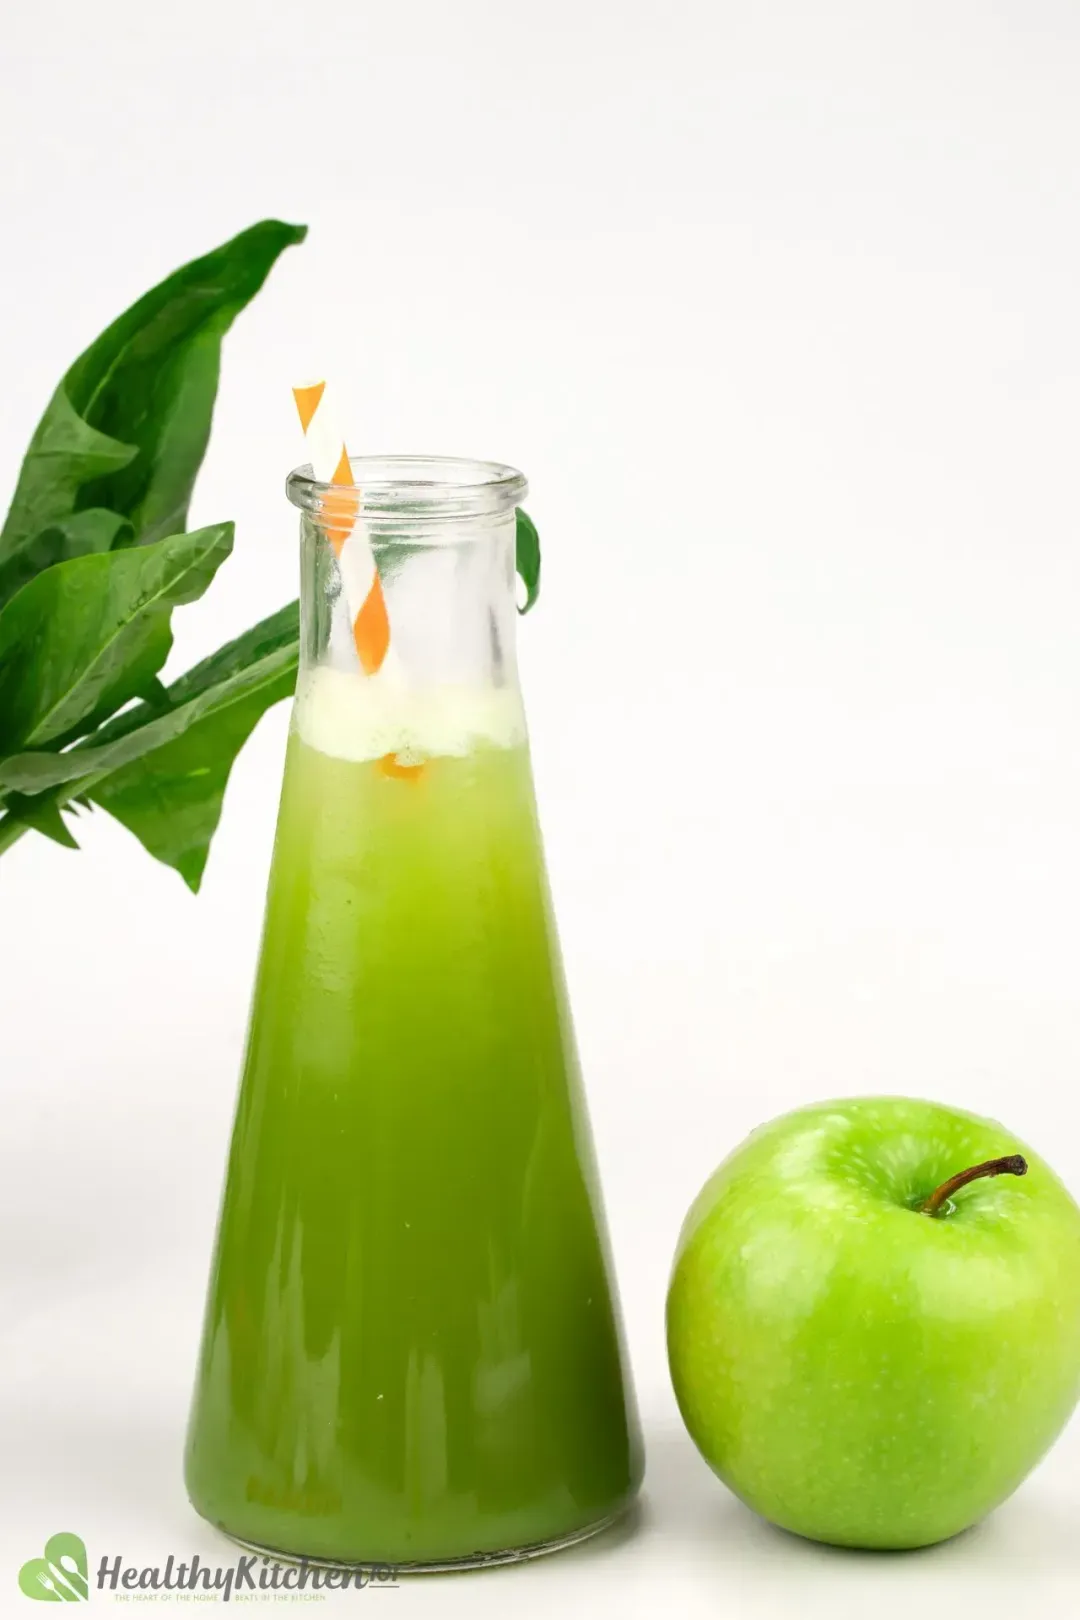 A pitcher of green apple juice decorated with an orange-striped straw alongside a whole green apple and spinach